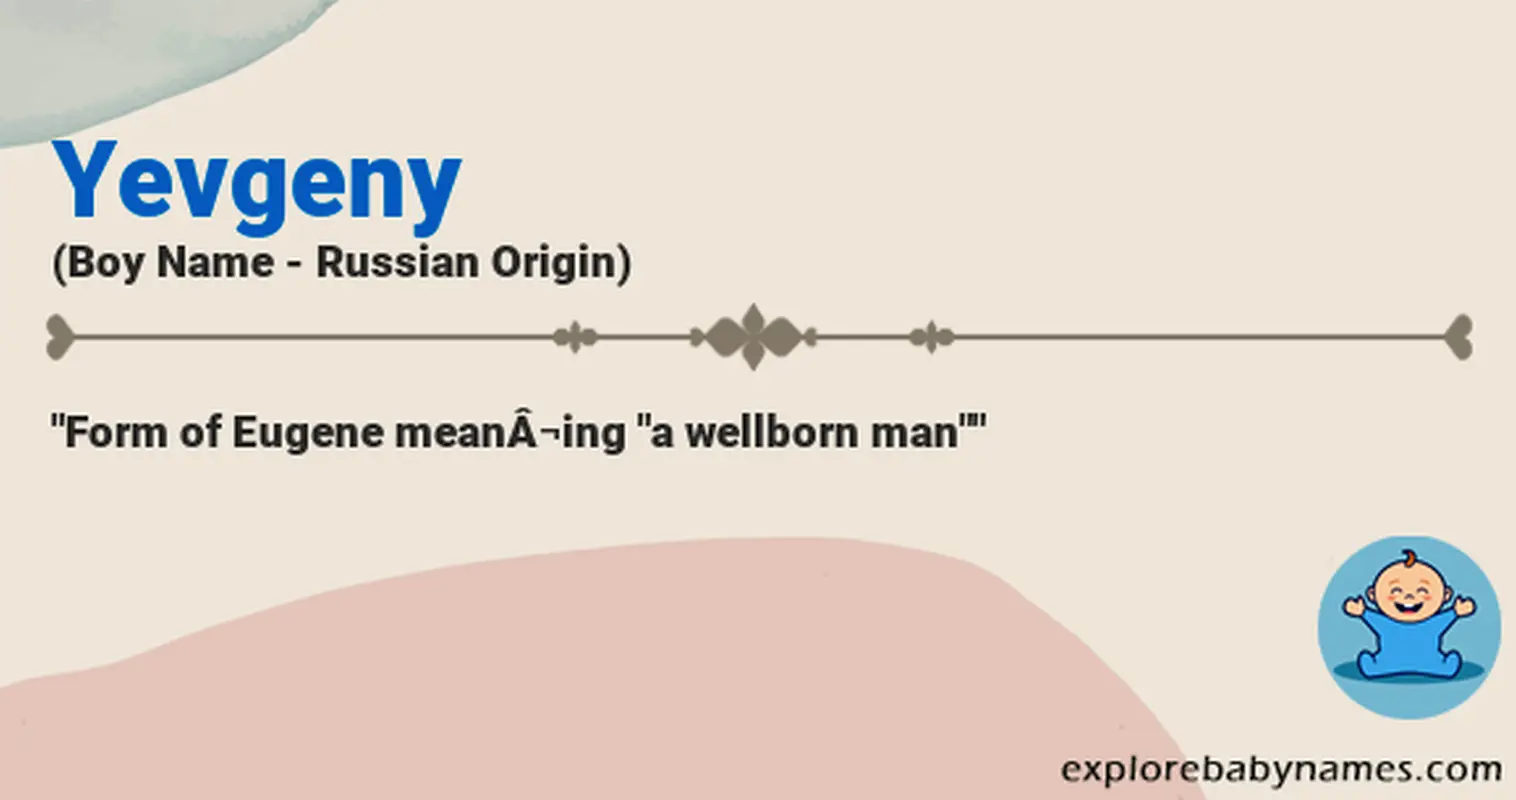 Meaning of Yevgeny